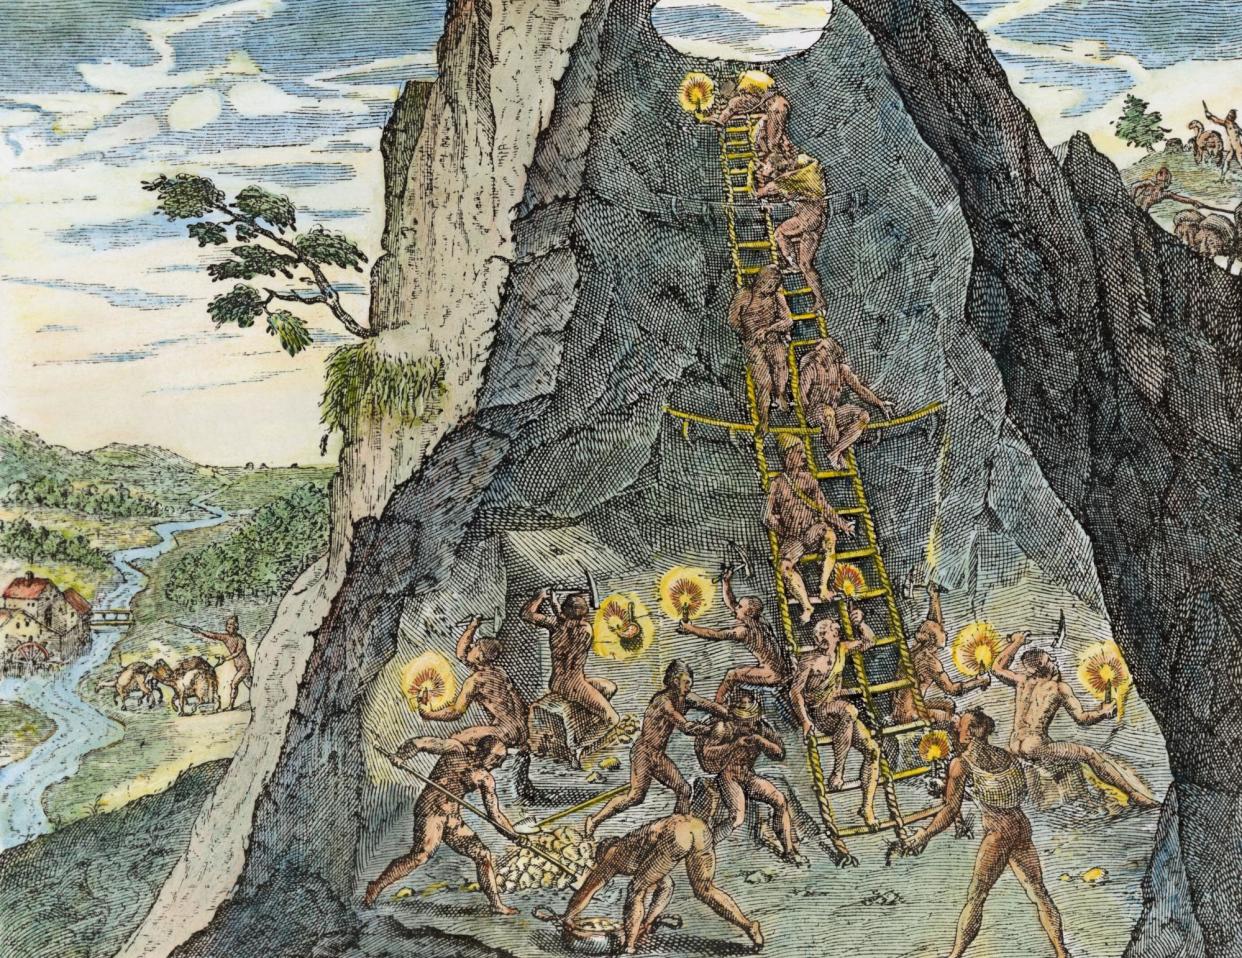 <span>Native Indians Working In The Silver Mine At Potosi, New Spain (Present-Day Bolivia). Line Engraving By Theodor De Bry, 1590.</span><span>Photograph: Granger/Rex/Shutterstock</span>